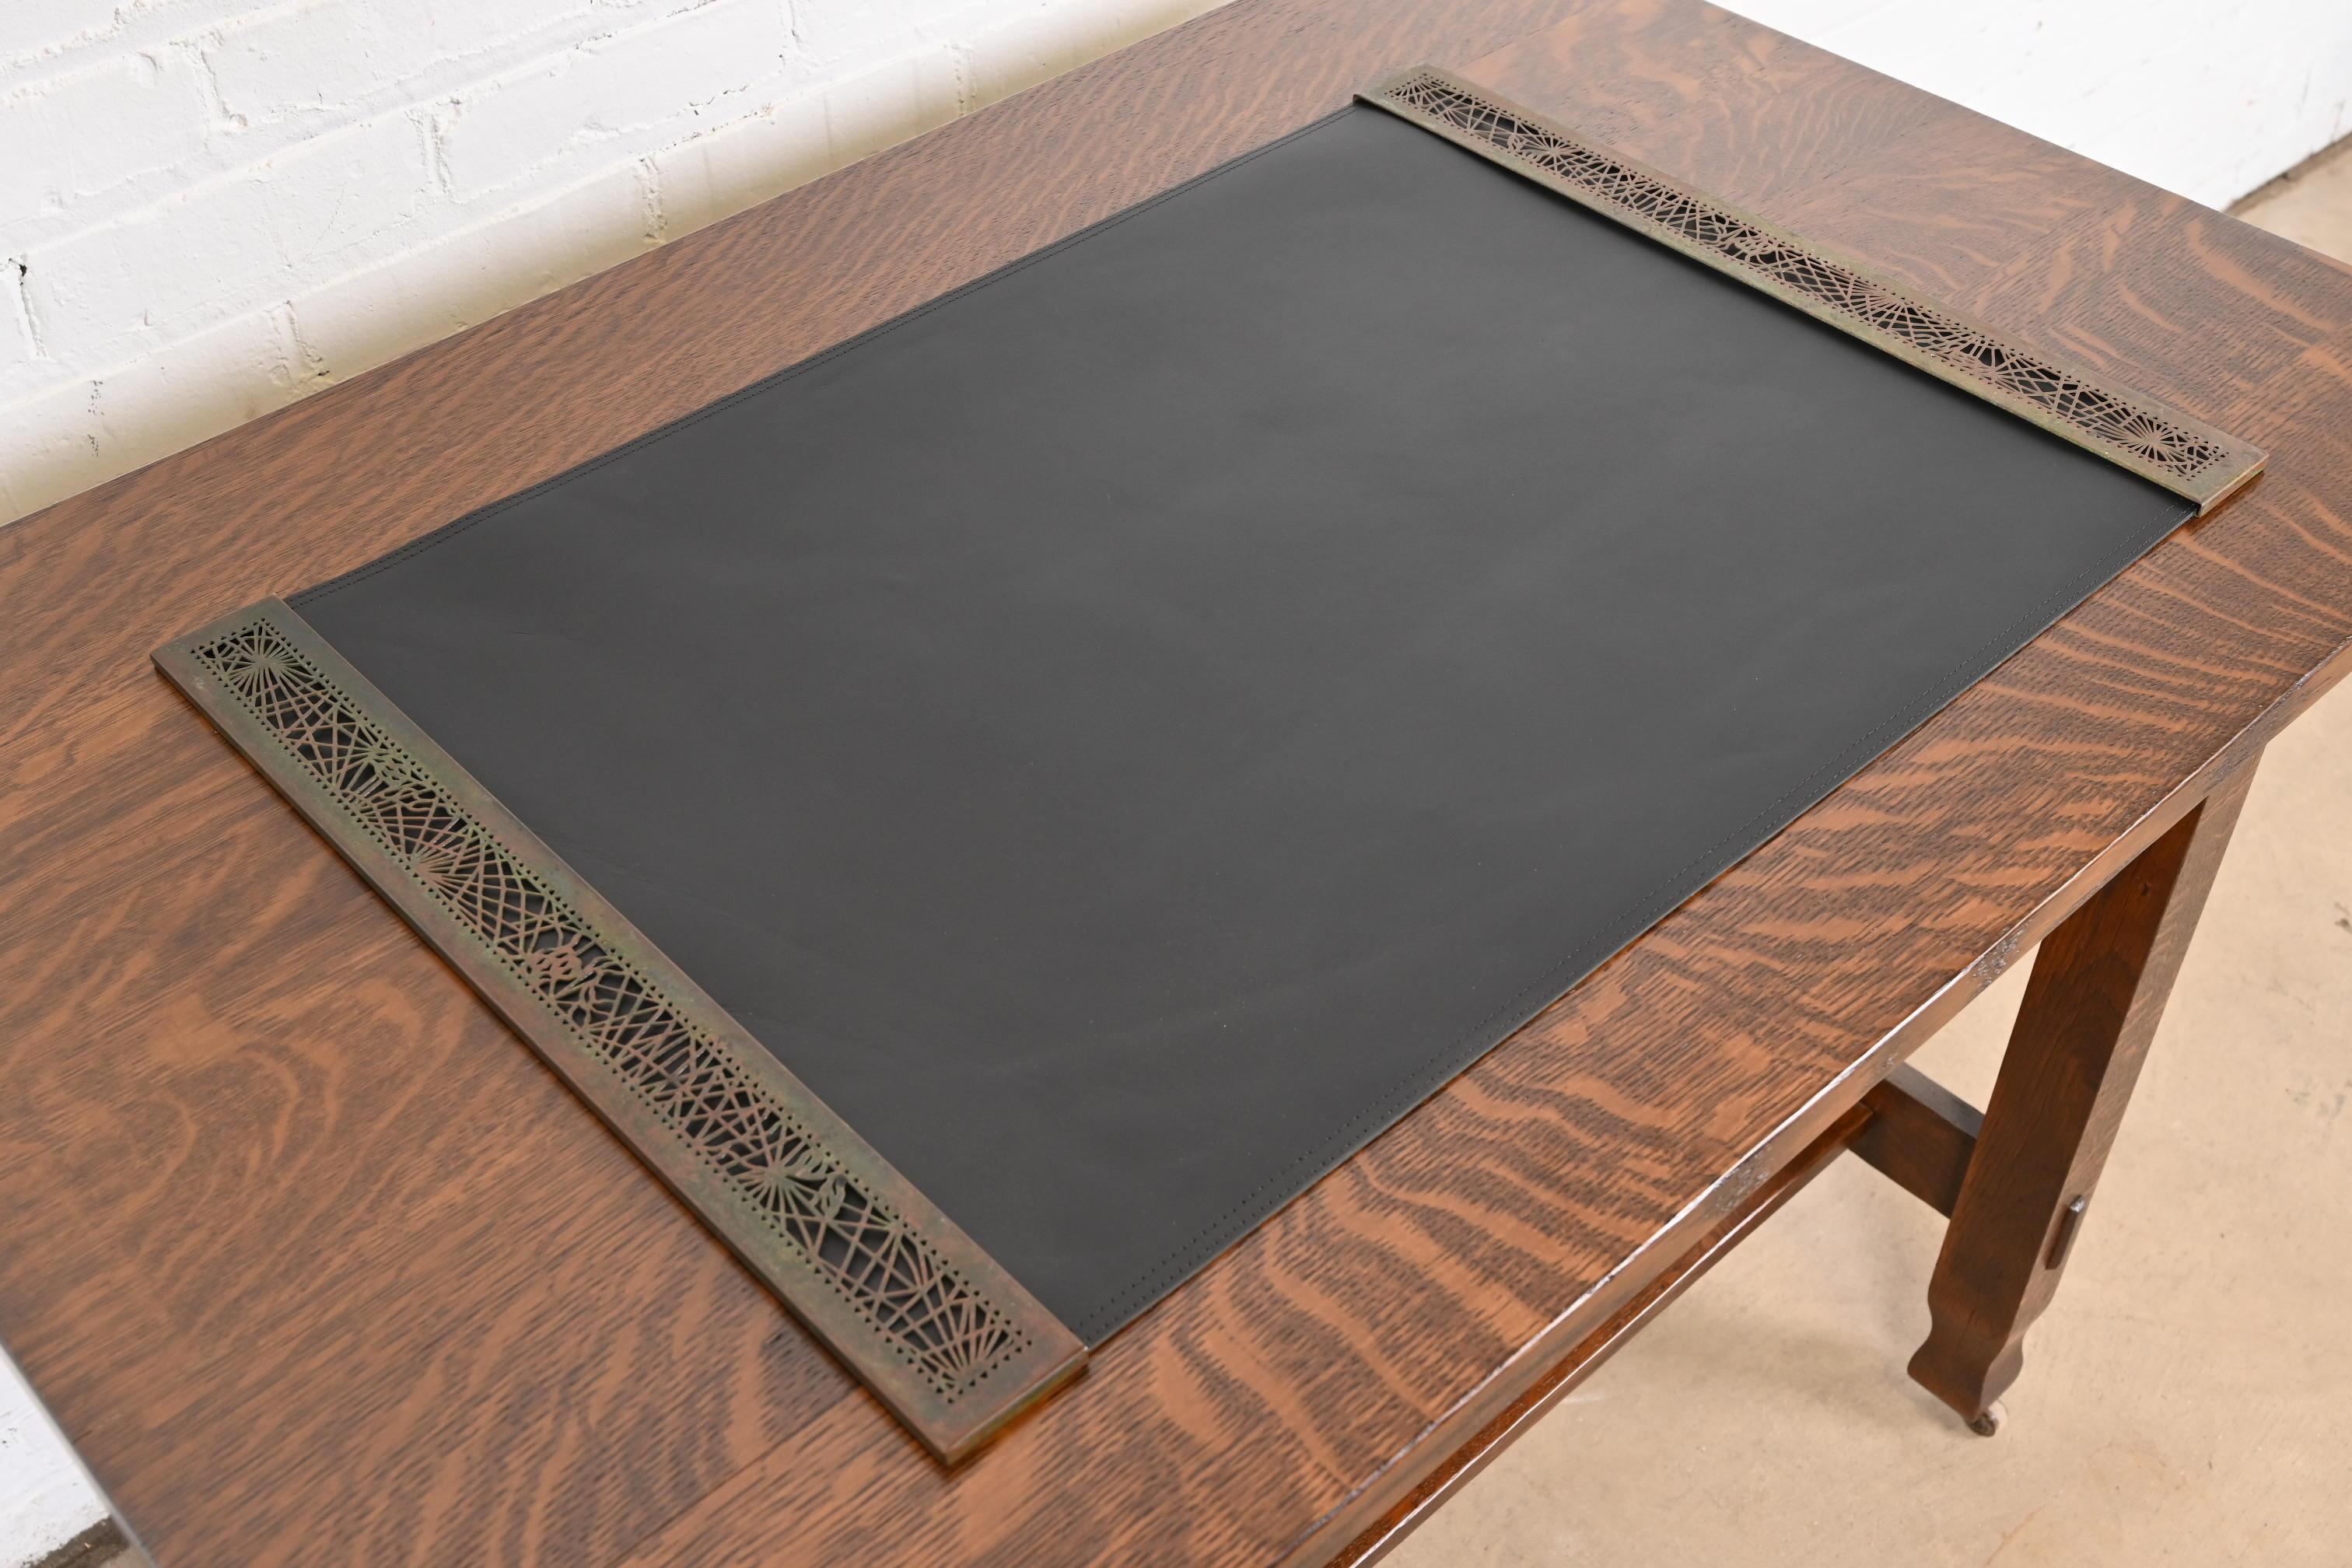 Tiffany Studios New York Pine Needle Bronze Blotter Ends With Leather Desk Pad In Good Condition For Sale In South Bend, IN